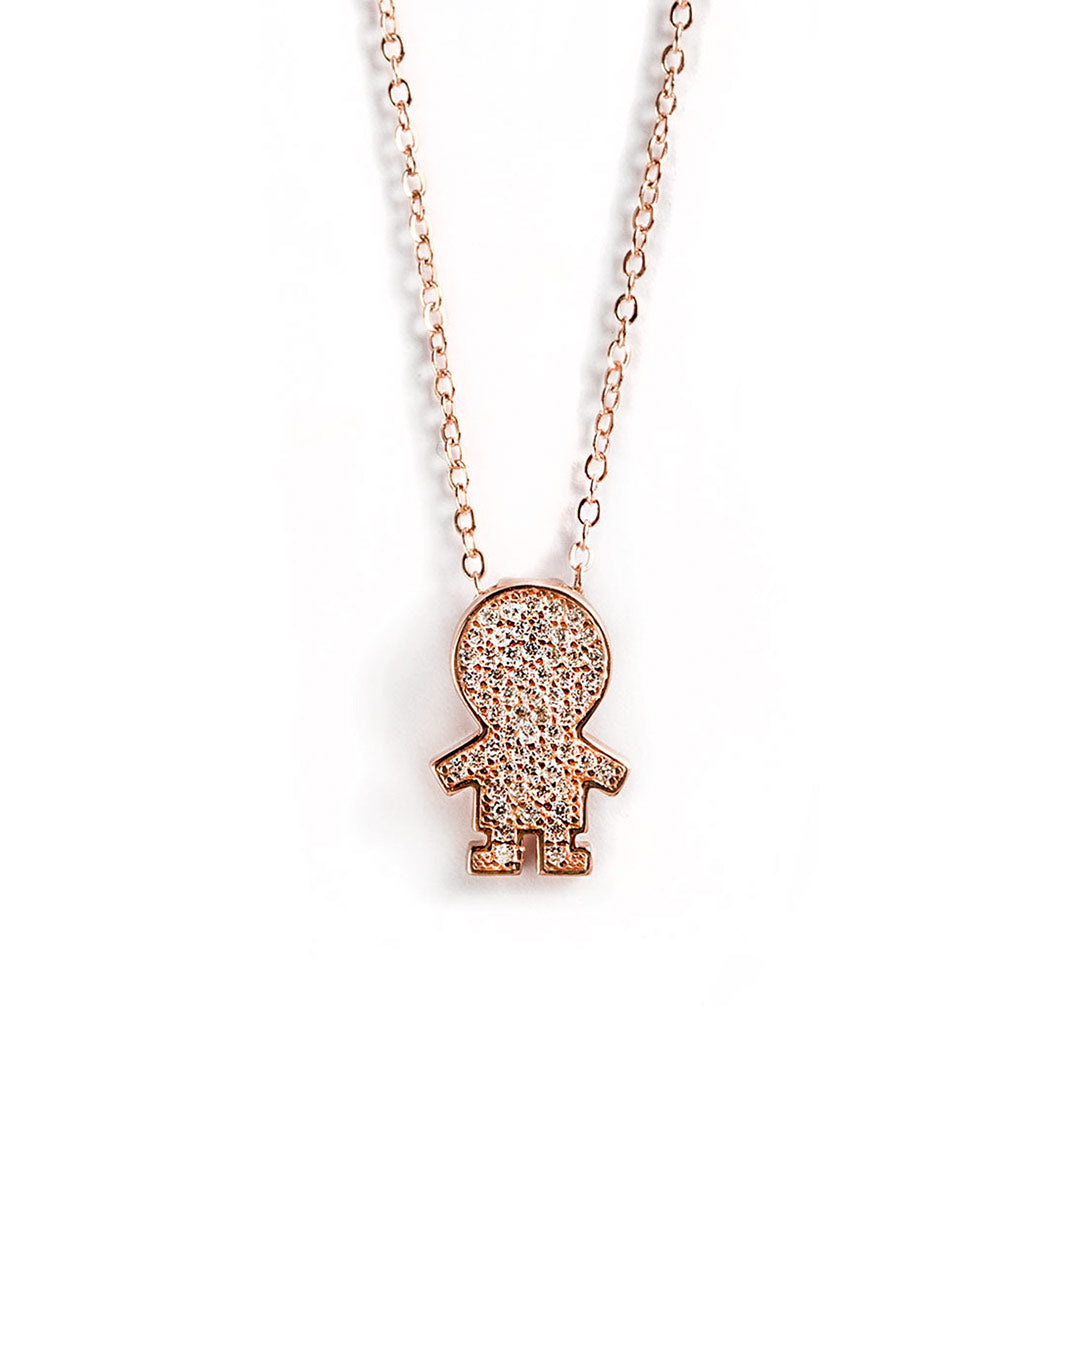 925 ROSE GOLD BOY PENDANT WITH CRYSTALS